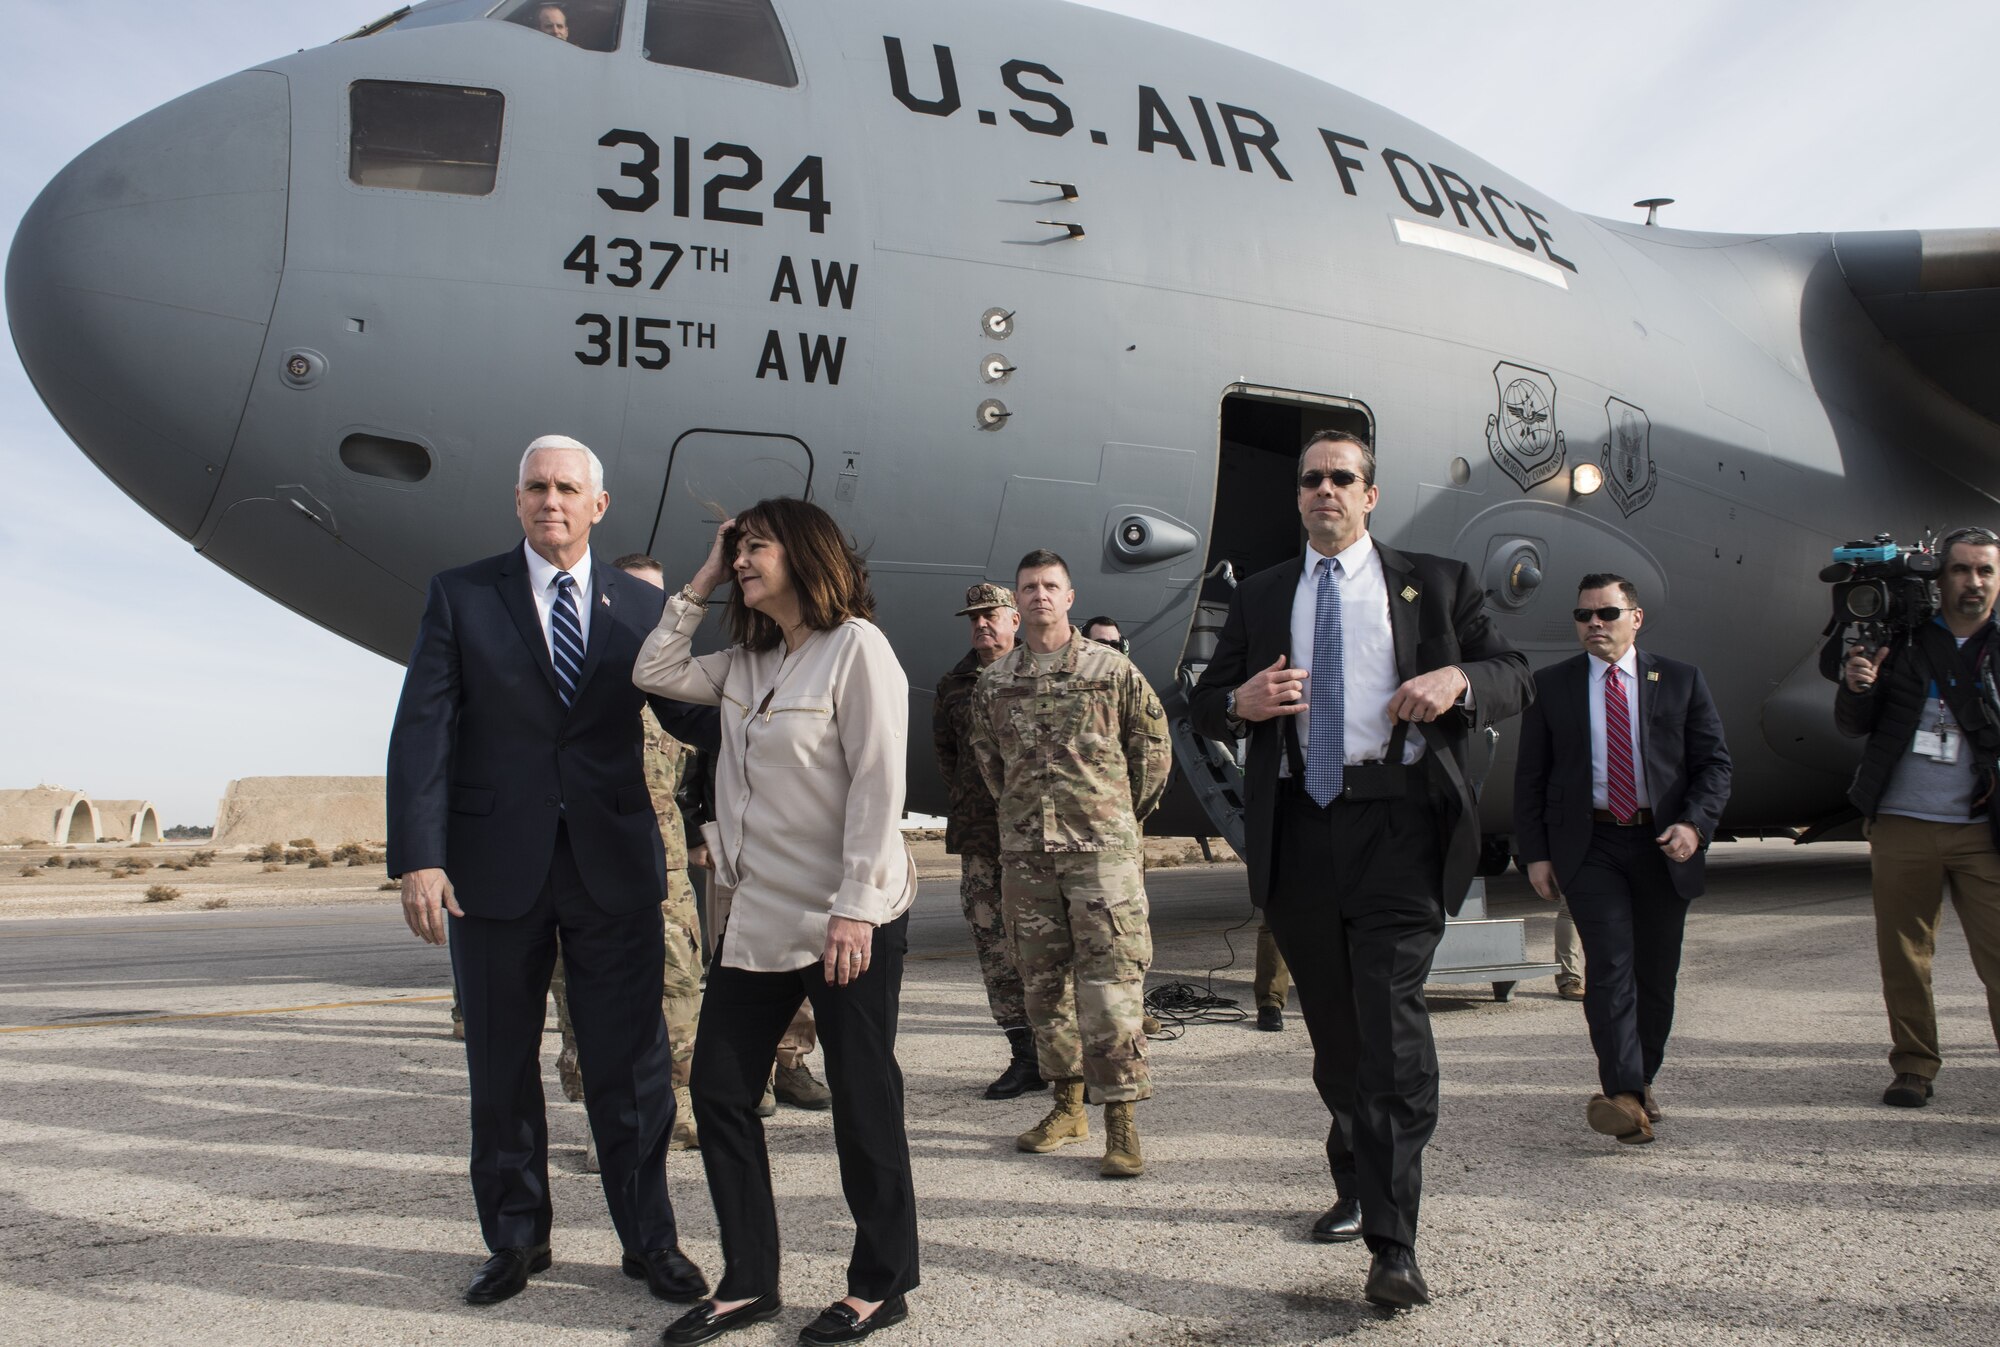 U.S. Vice President Mike Pence, accompanied by his wife Karen, arrives at an undisclosed military installation in Southwest Asia, January 21, 2018. Pence made time during his extended trip across the region to visit with service members and thank them for their continued efforts in support of Operation Inherent Resolve. (U.S. Air Force photo by Staff Sgt. Joshua Kleinholz)